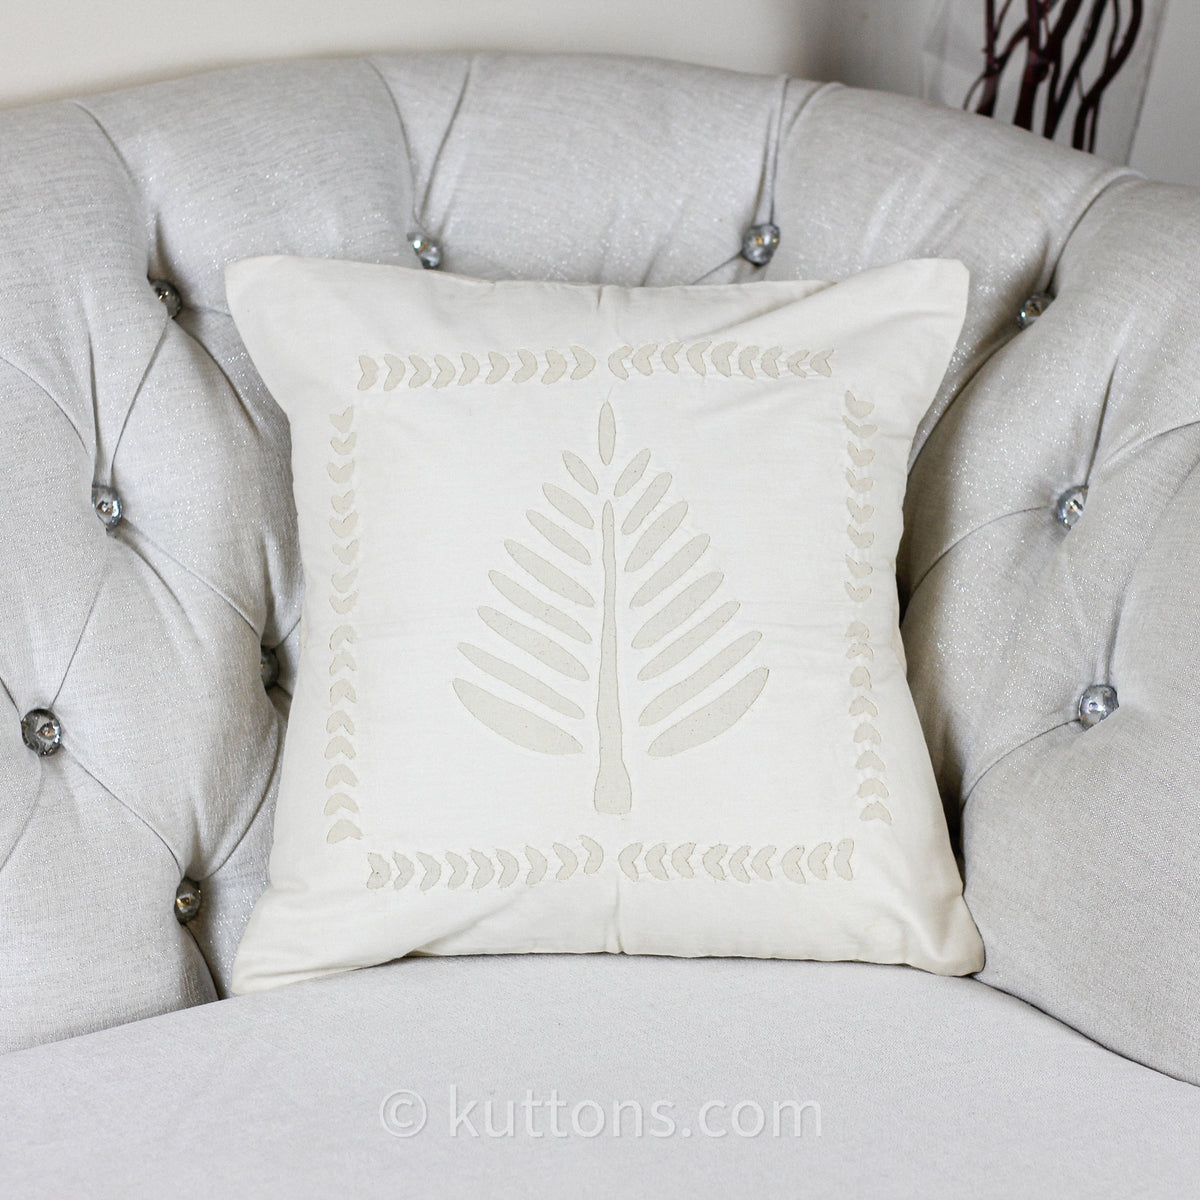 Applique Work Cotton Cushion Cover - Handcrafted Decorative Pillow | Cream, 16x16"